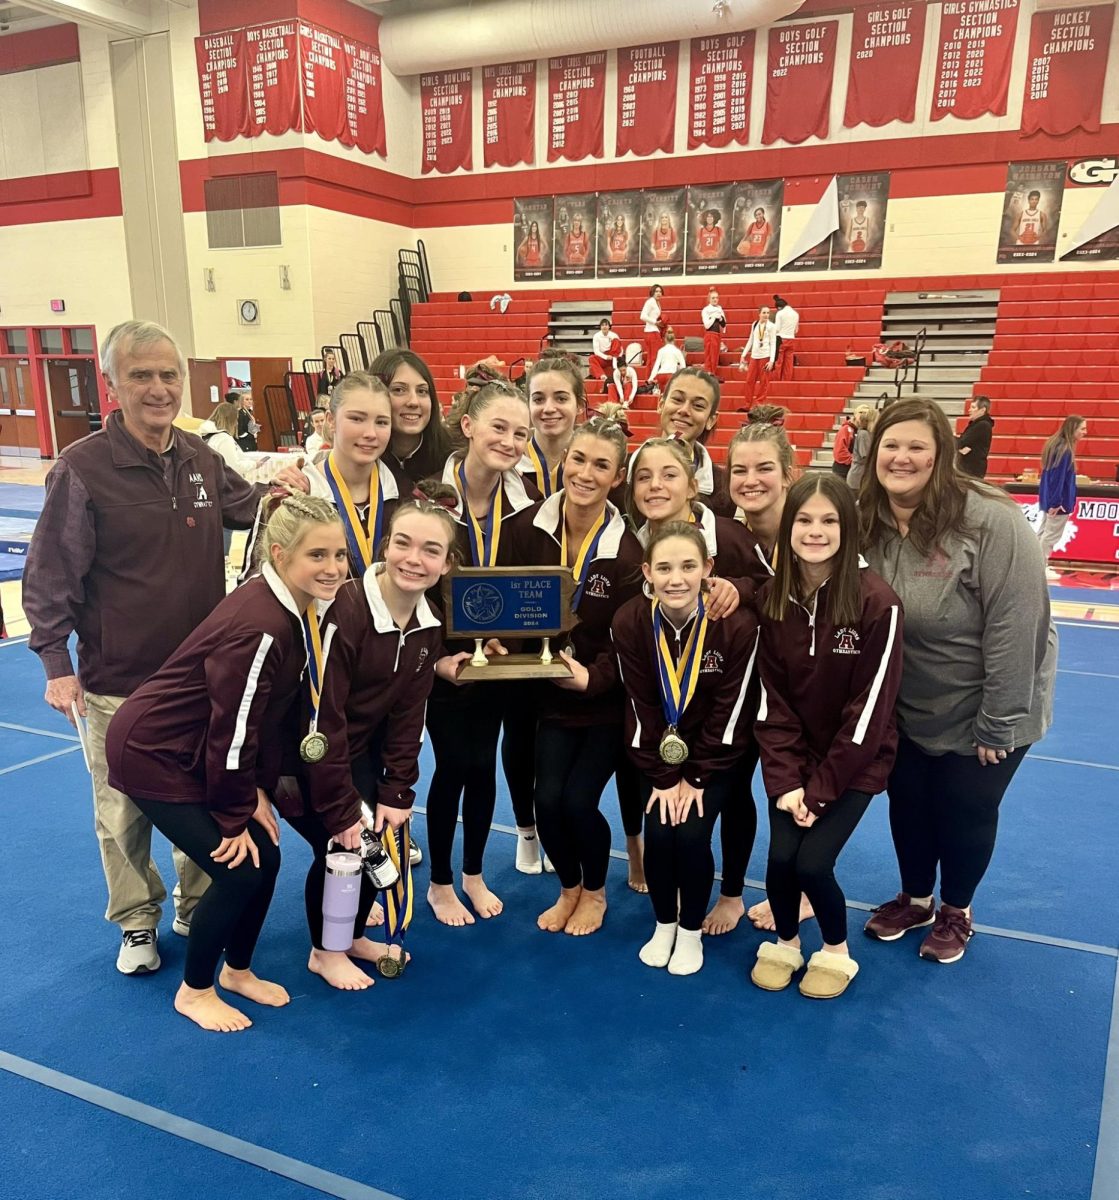 The best of the best. The gymnastics team poses for a photo together. The team took home first place at the State championship.